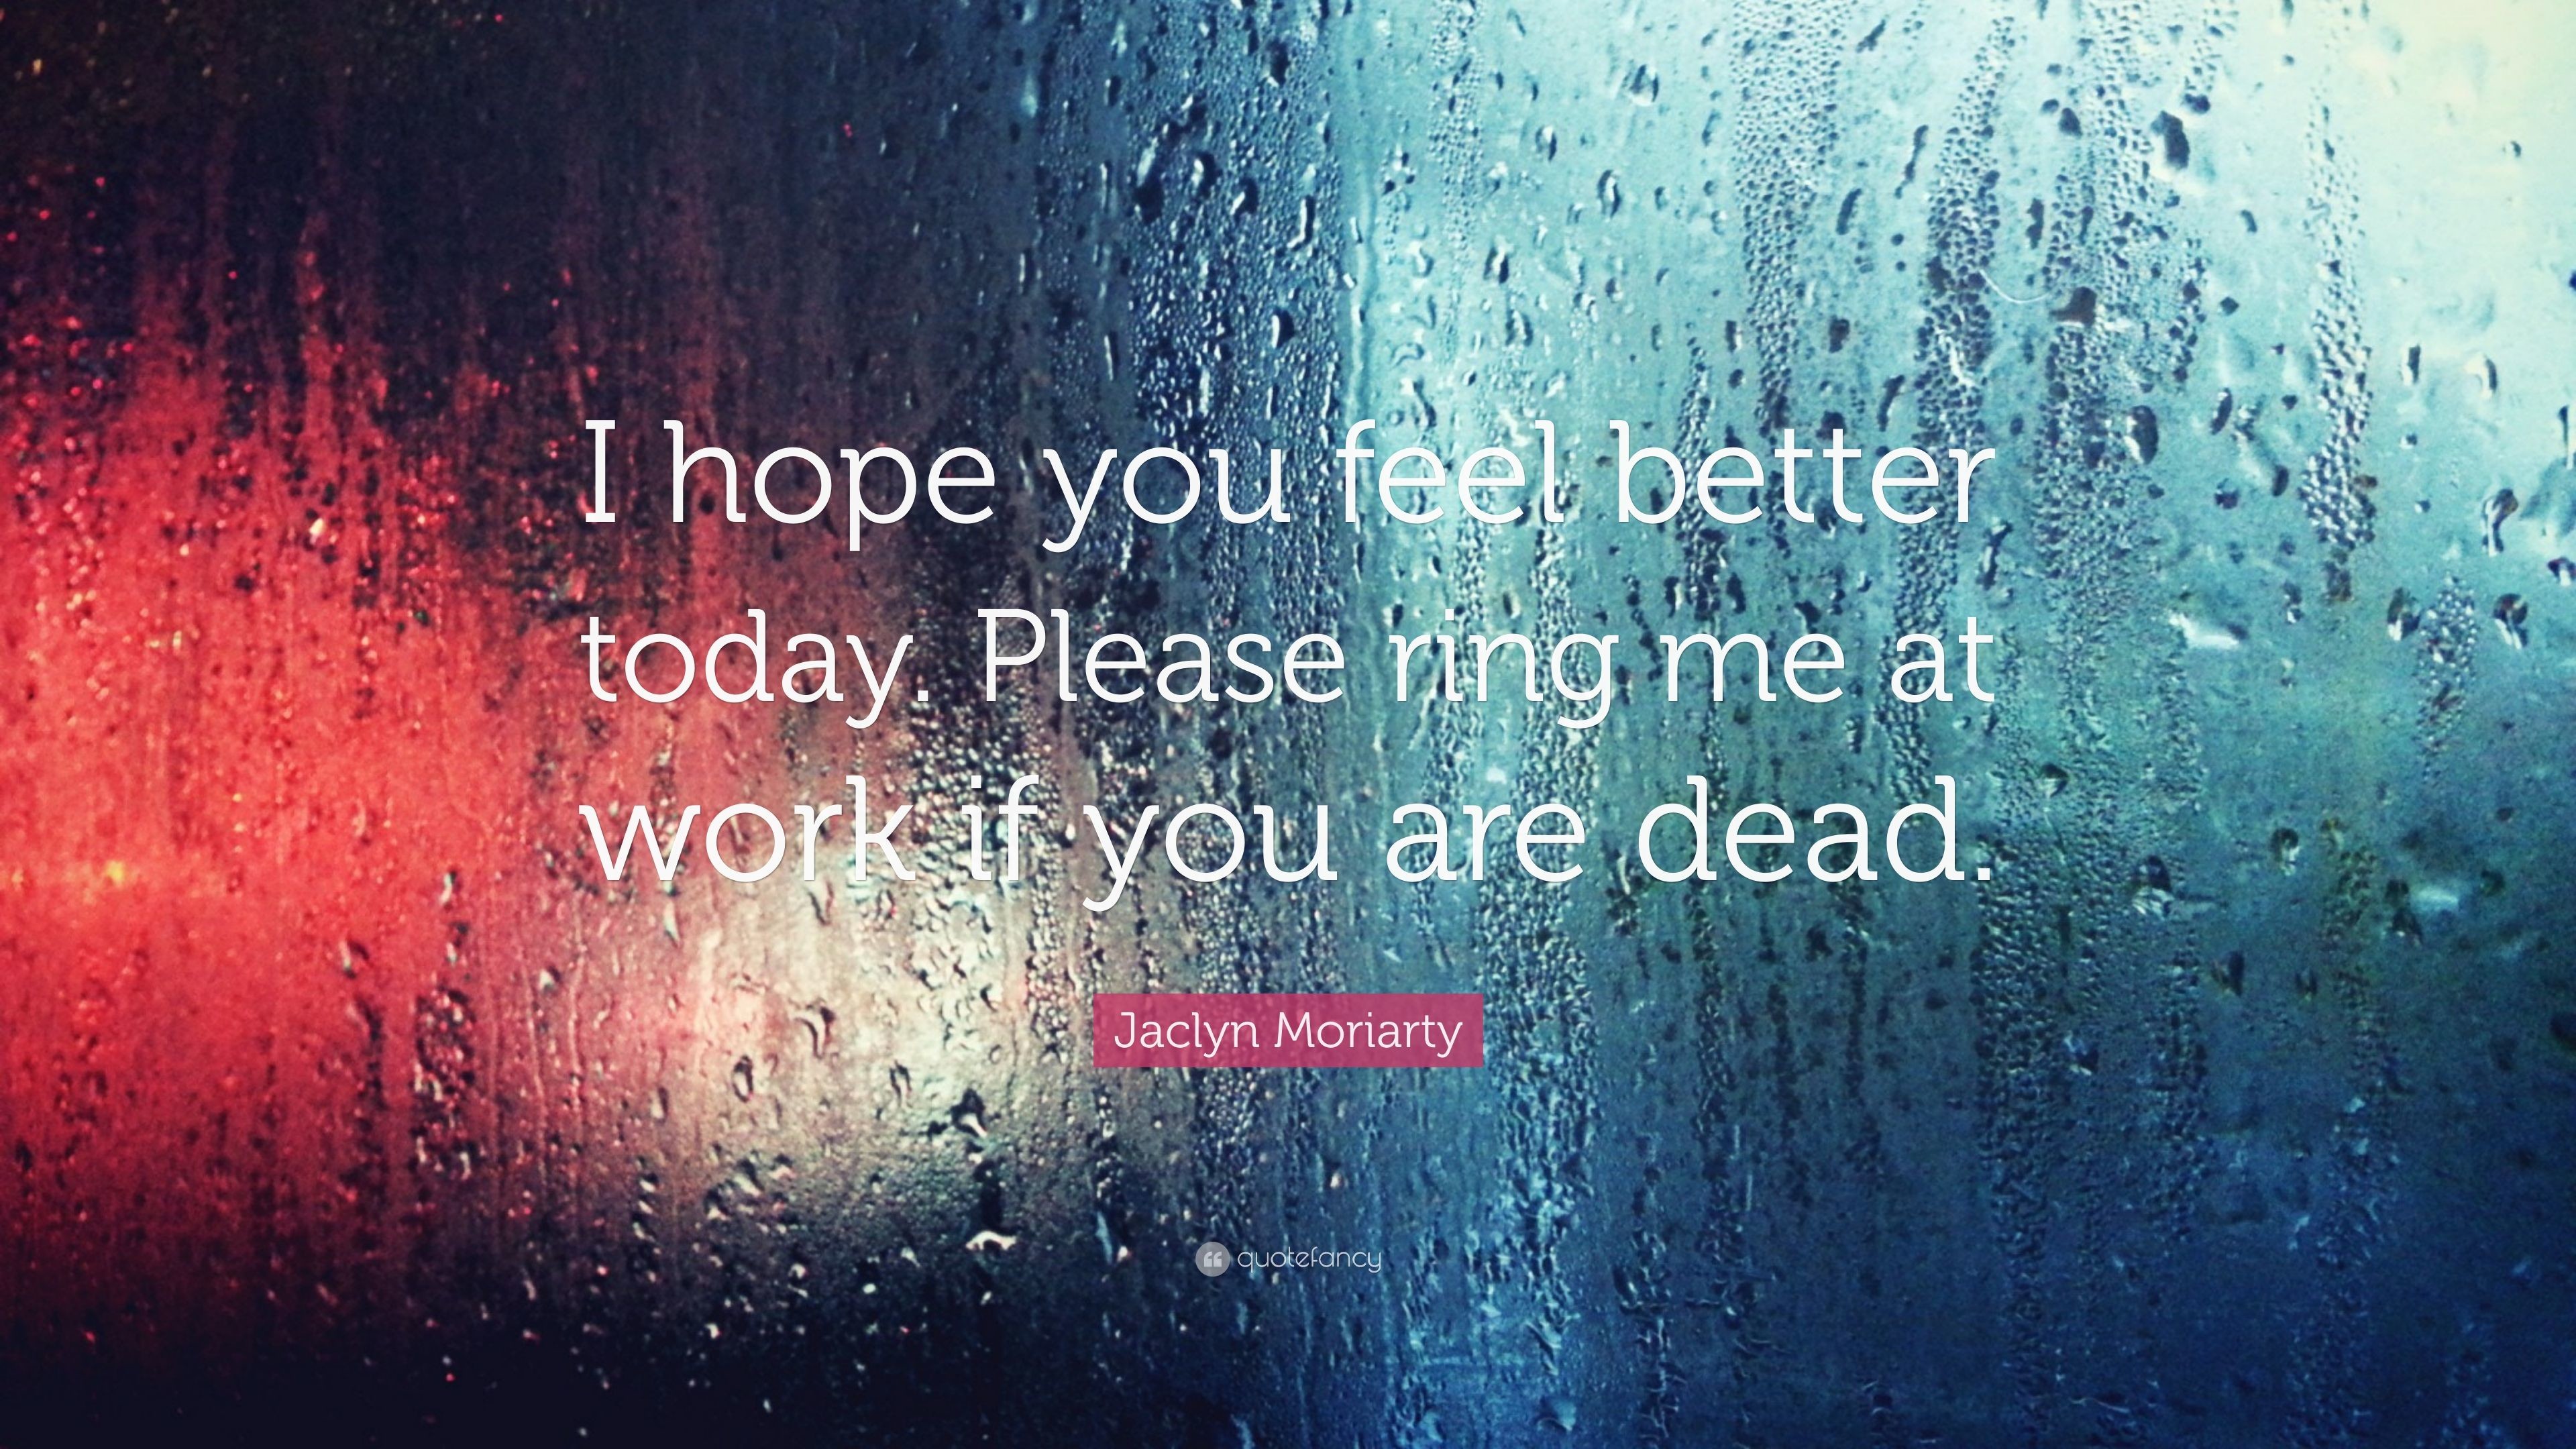 3840x2160 Jaclyn Moriarty Quote: “I hope you feel better today. Please ring me at